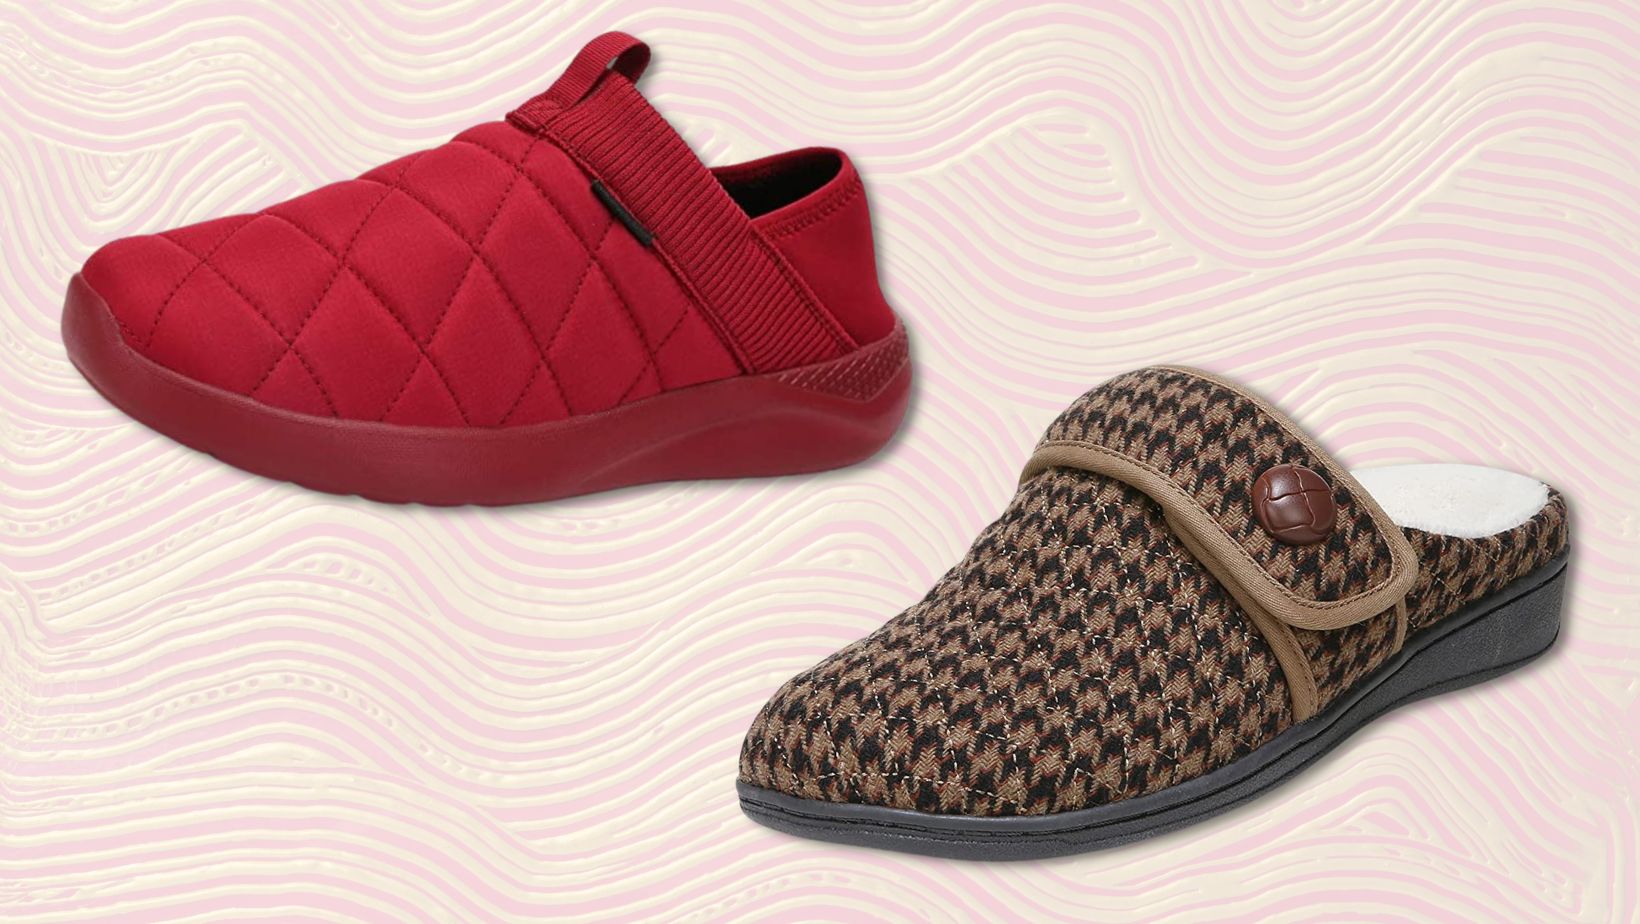 Subu Indoor Outdoor Slippers Review 2019 | The Strategist